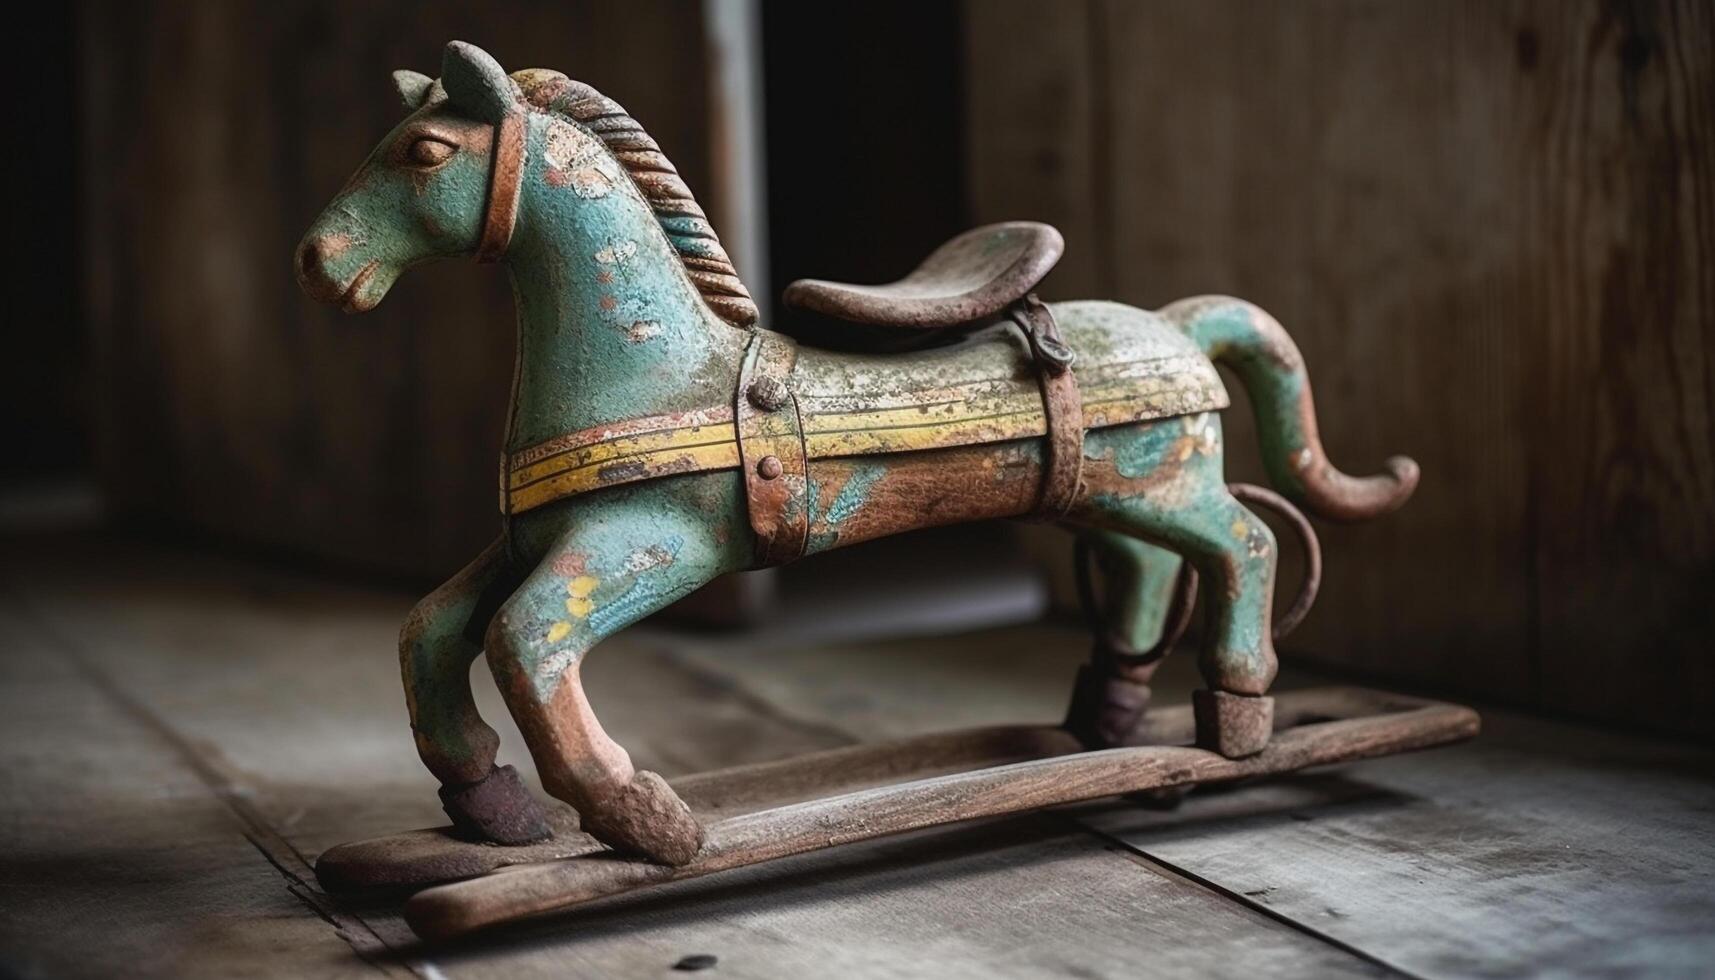 Antique rocking horse, a rustic souvenir of childhood fun playing generated by AI photo